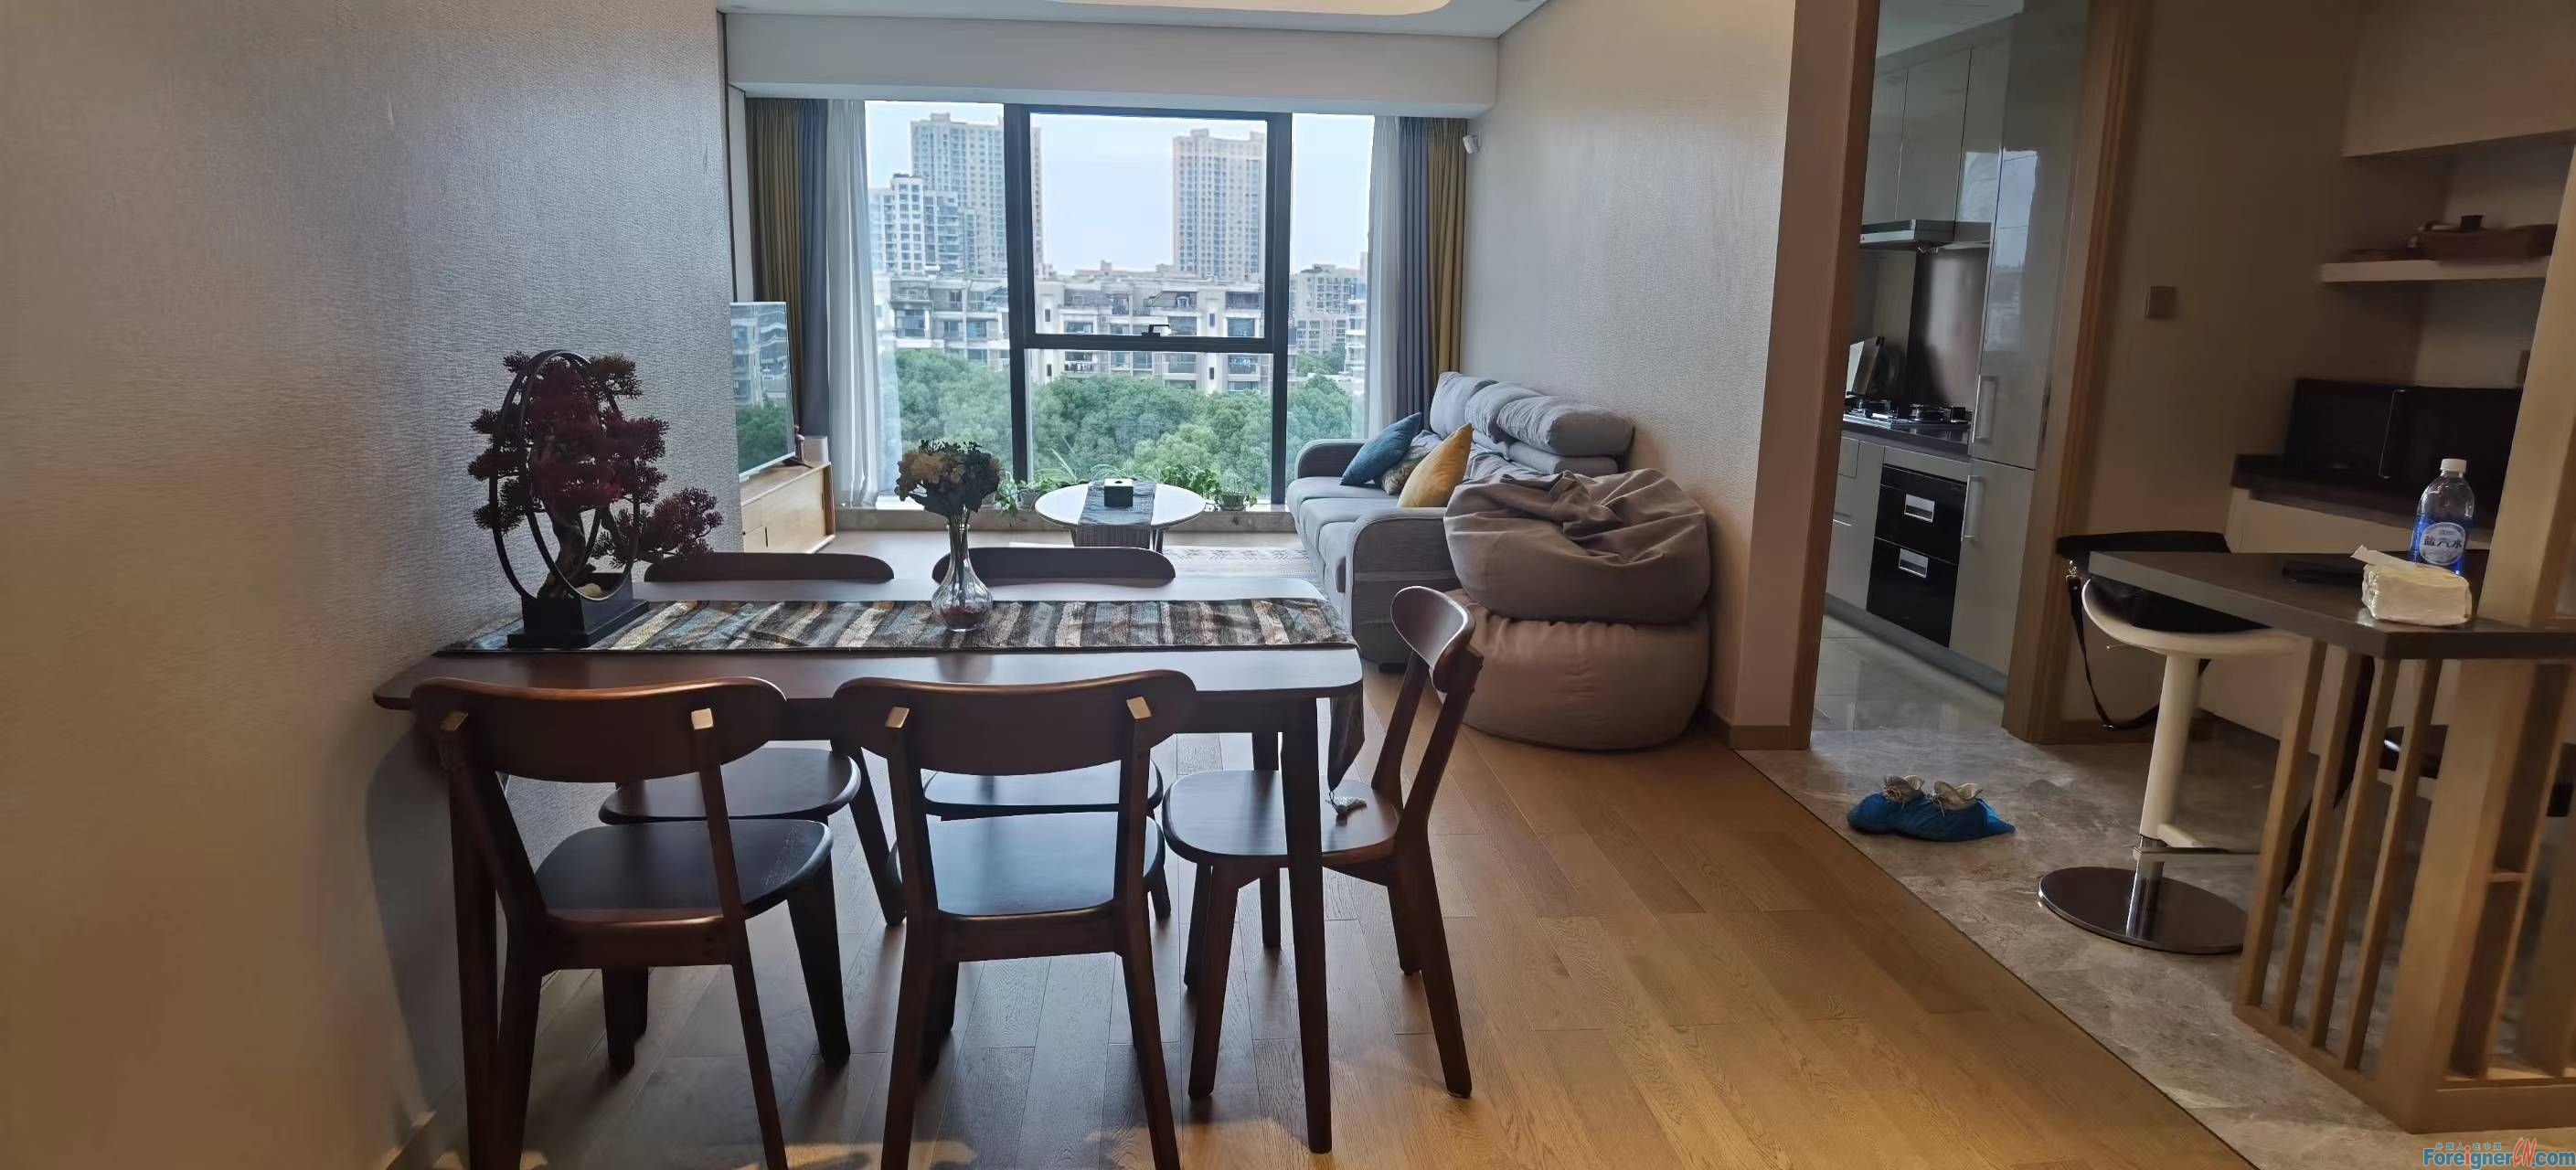 Stunning！！！ Nice apartment rent in Suzhou,SIP/ Spacious and bright rooms/central AC,Nearby Times Square /Subway line1 below/Close to Times Square,Eslite book store